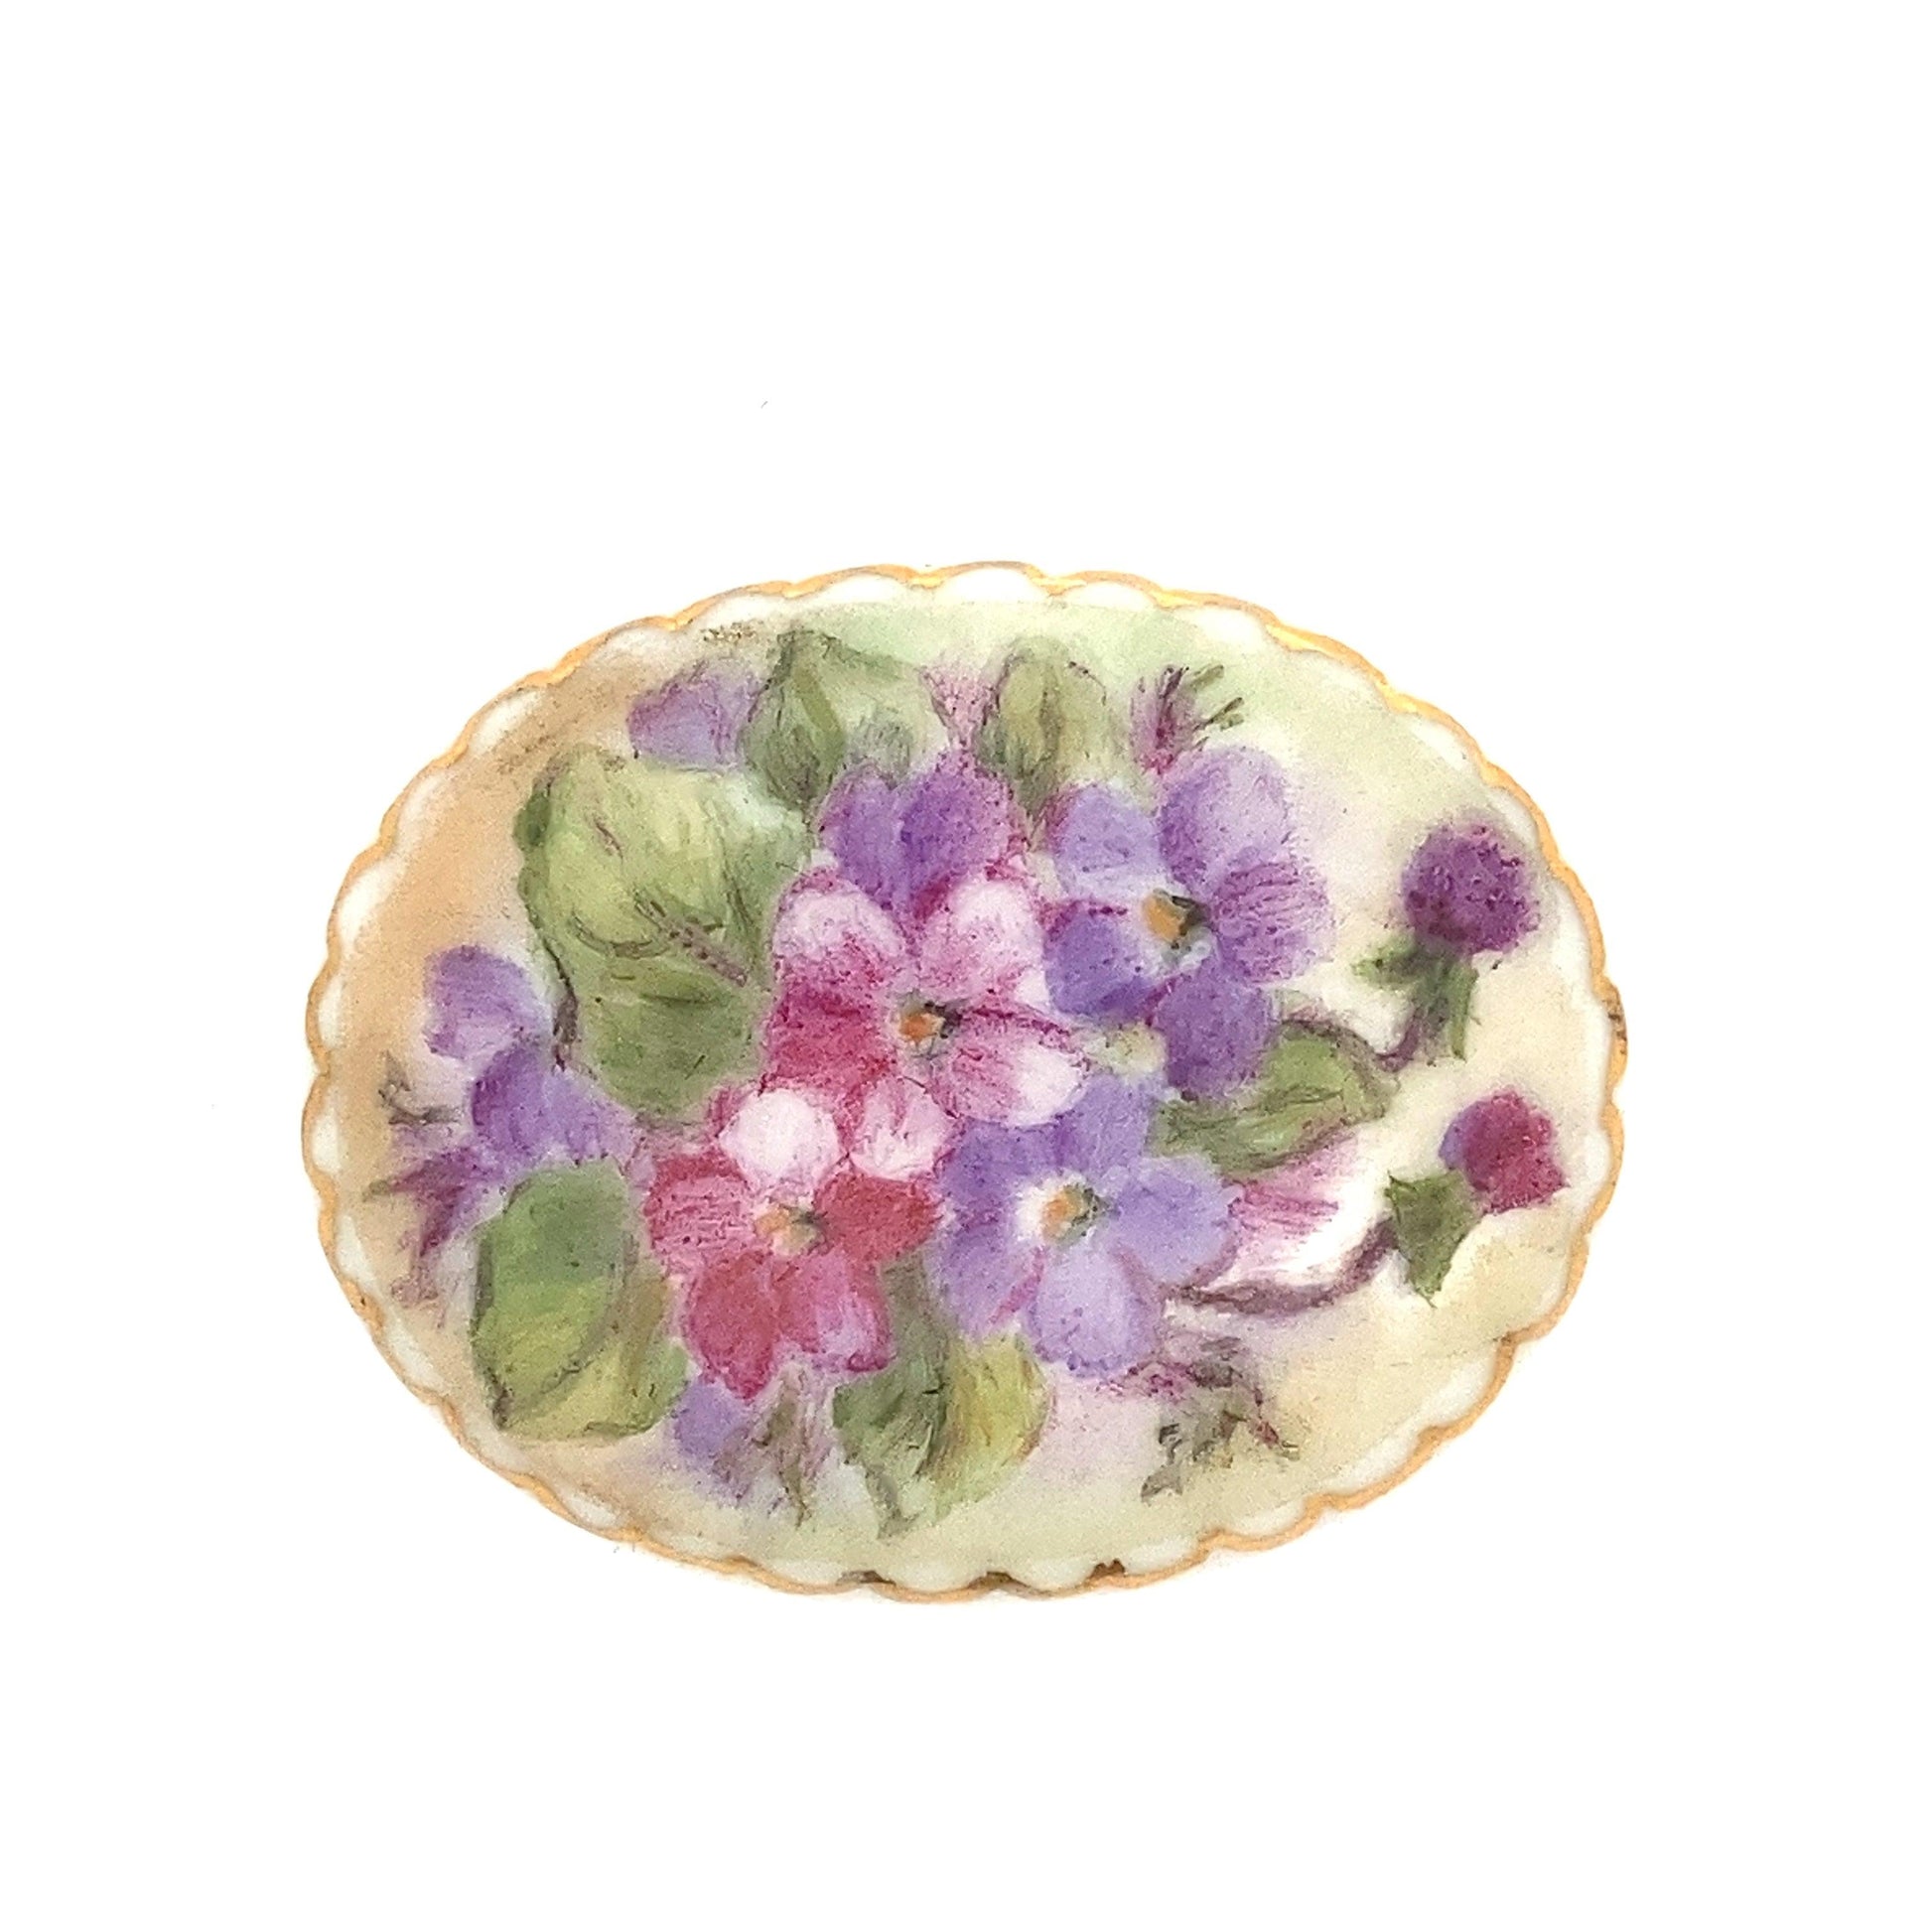 Lapland 2" Oval Hand-Painted Porcelain Broach Piece - ipawnishop.com